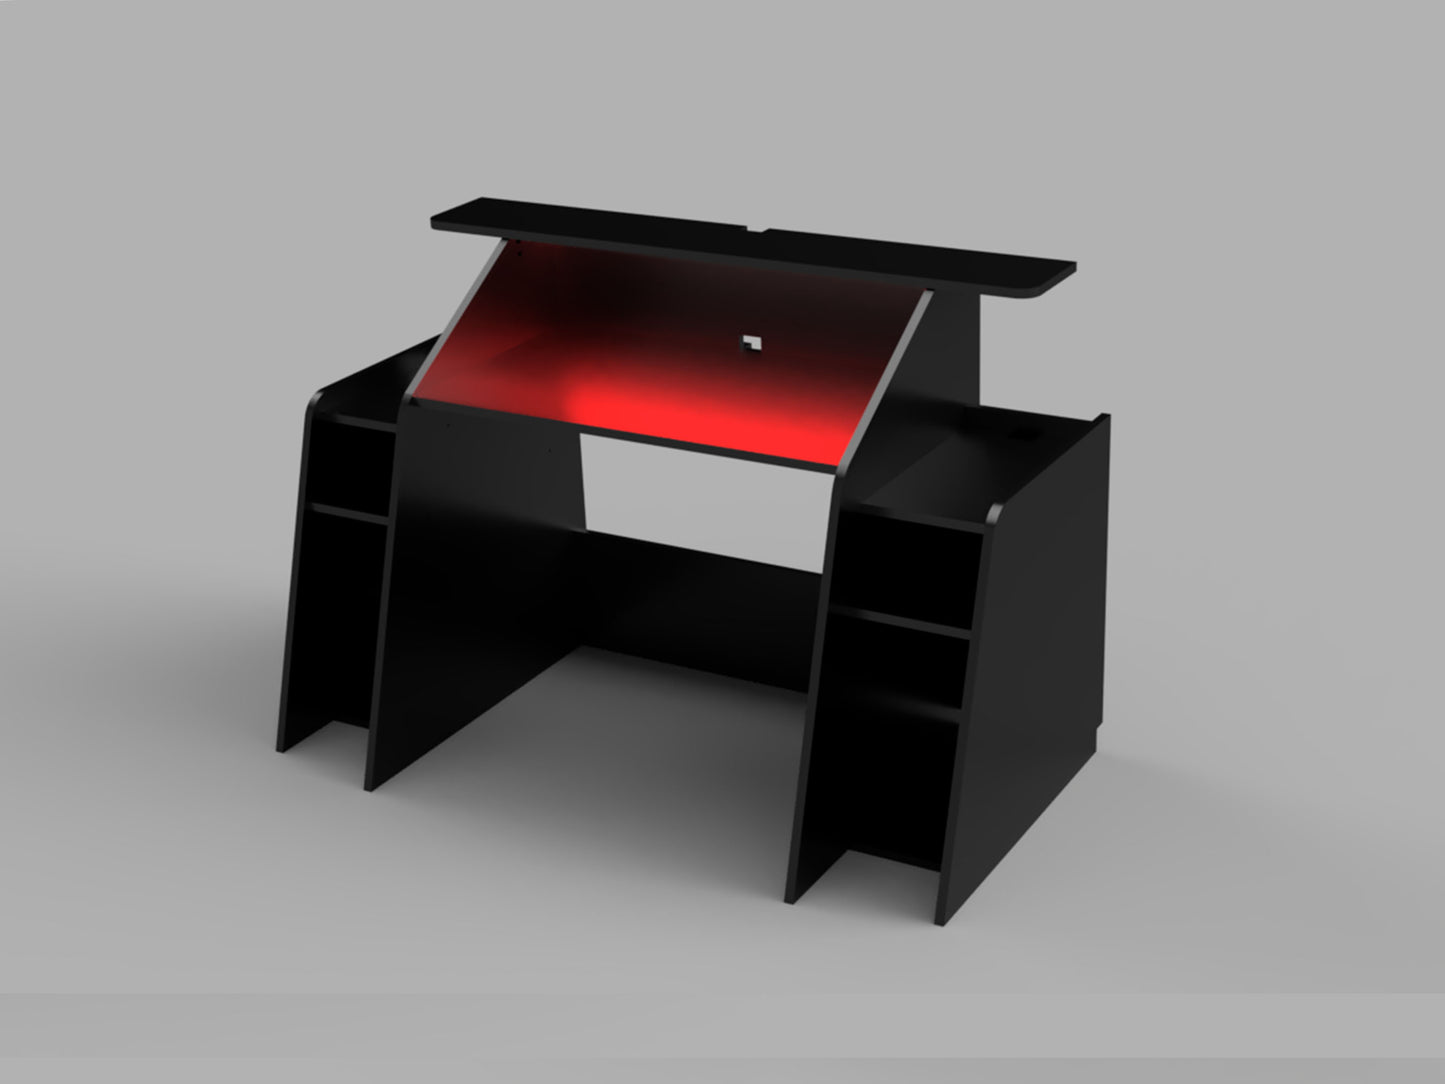 Transform your gaming setup into a powerhouse with the ultimate gaming desk - Nebula Gaming Desk. Engineered for performance and designed with gamers in mind, this desk is your ticket to domination on the virtual battlefield.